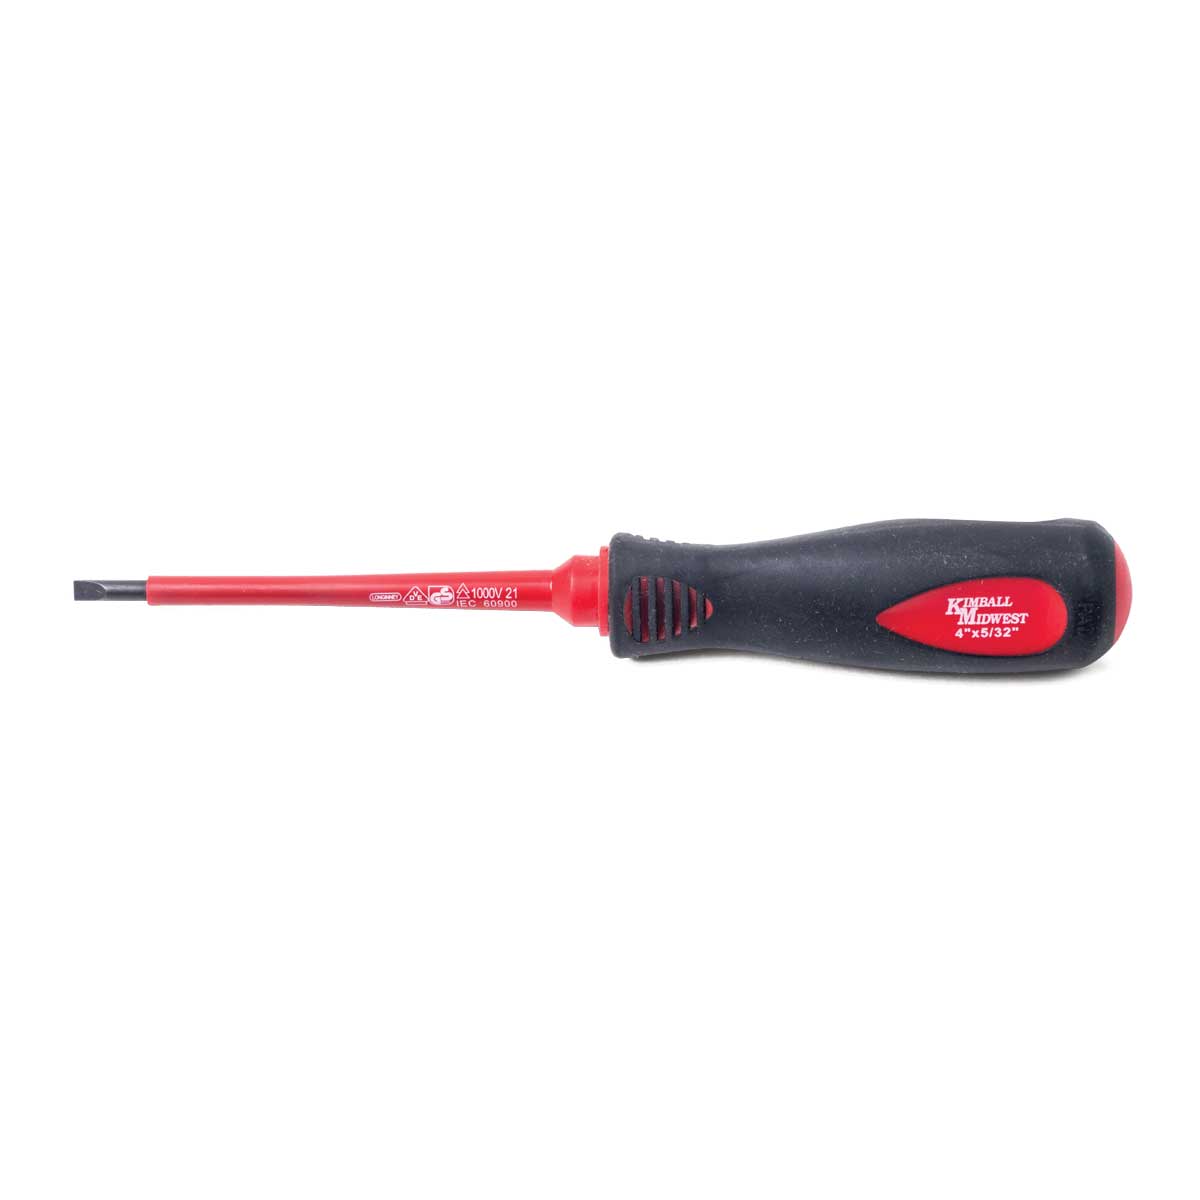 Insulated Slotted 5/32" Screwdriver